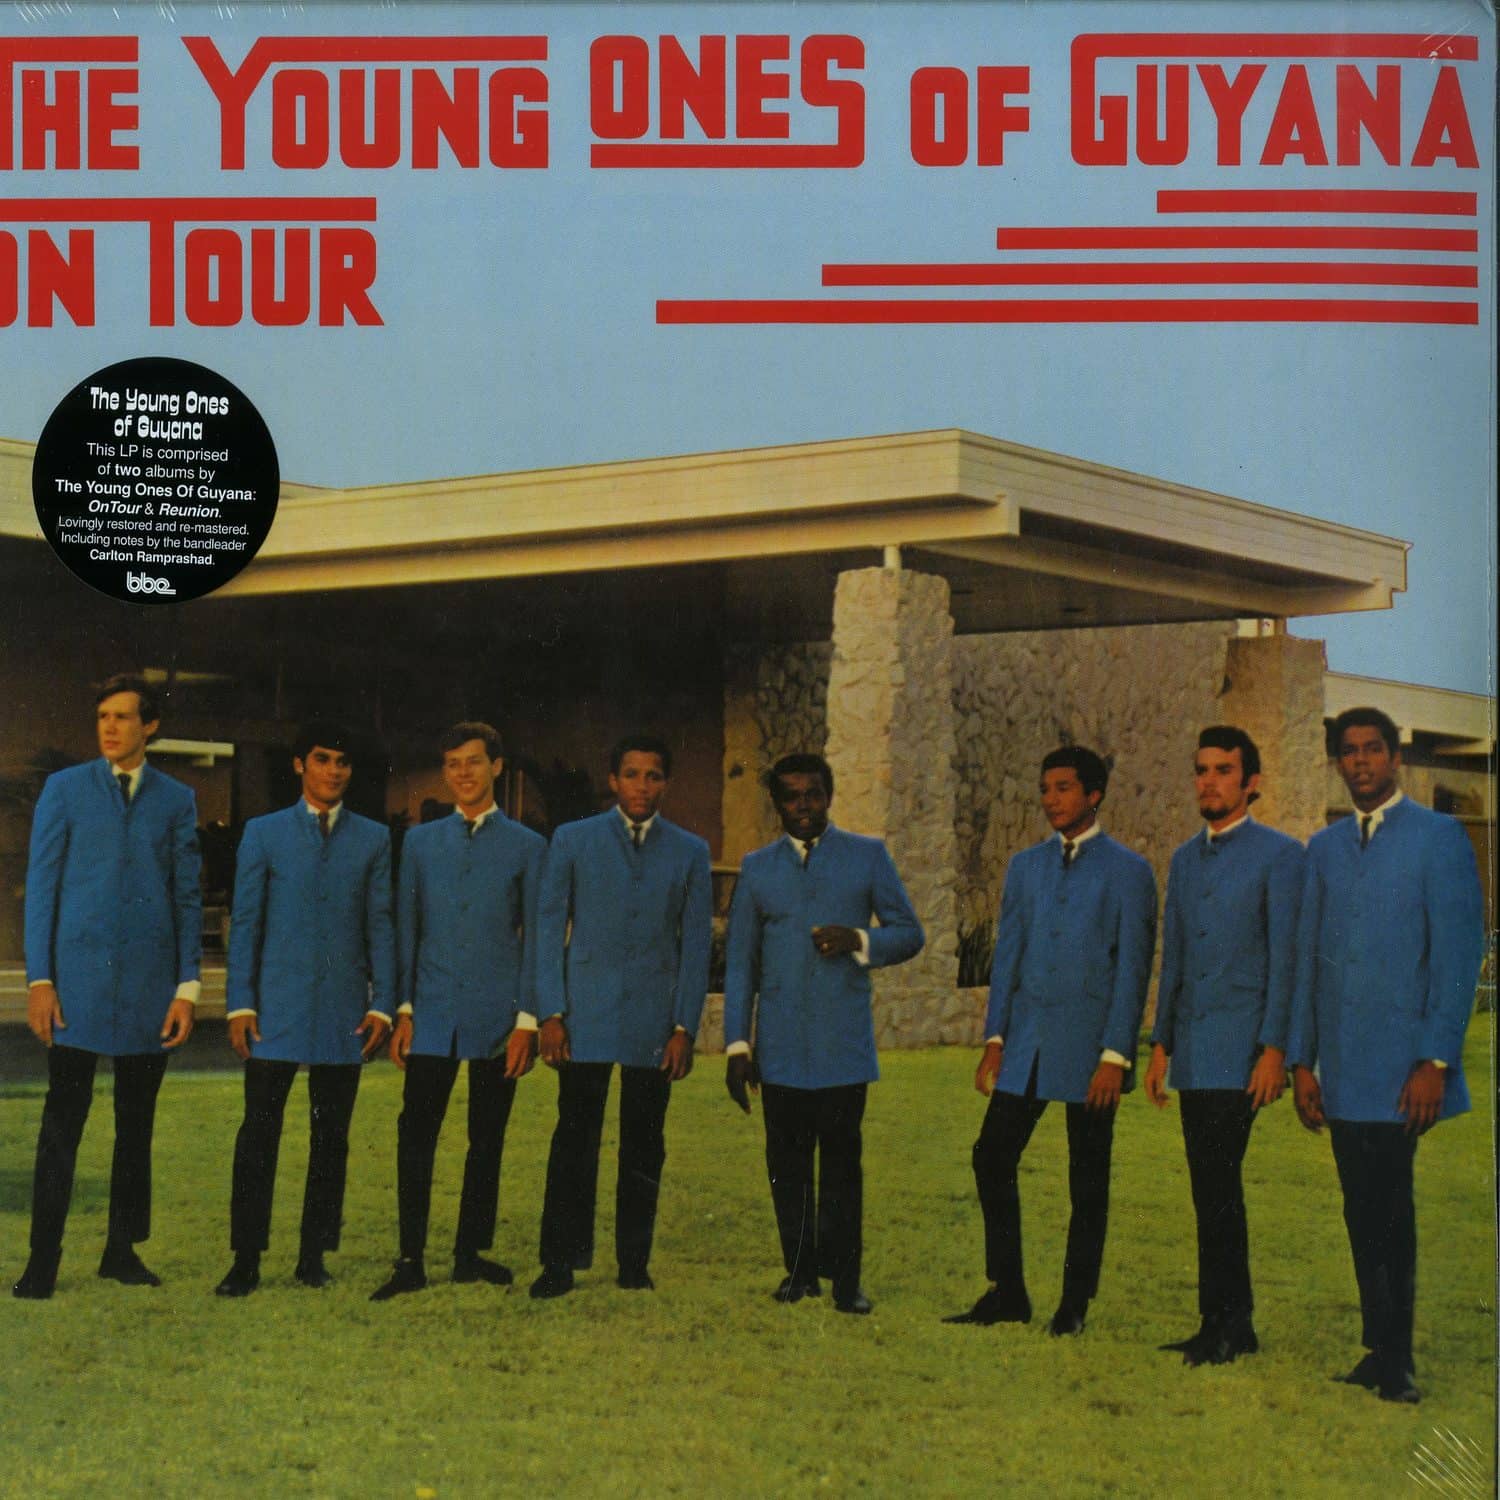 The Young Ones Of Guyana - ON TOUR / REUNION 